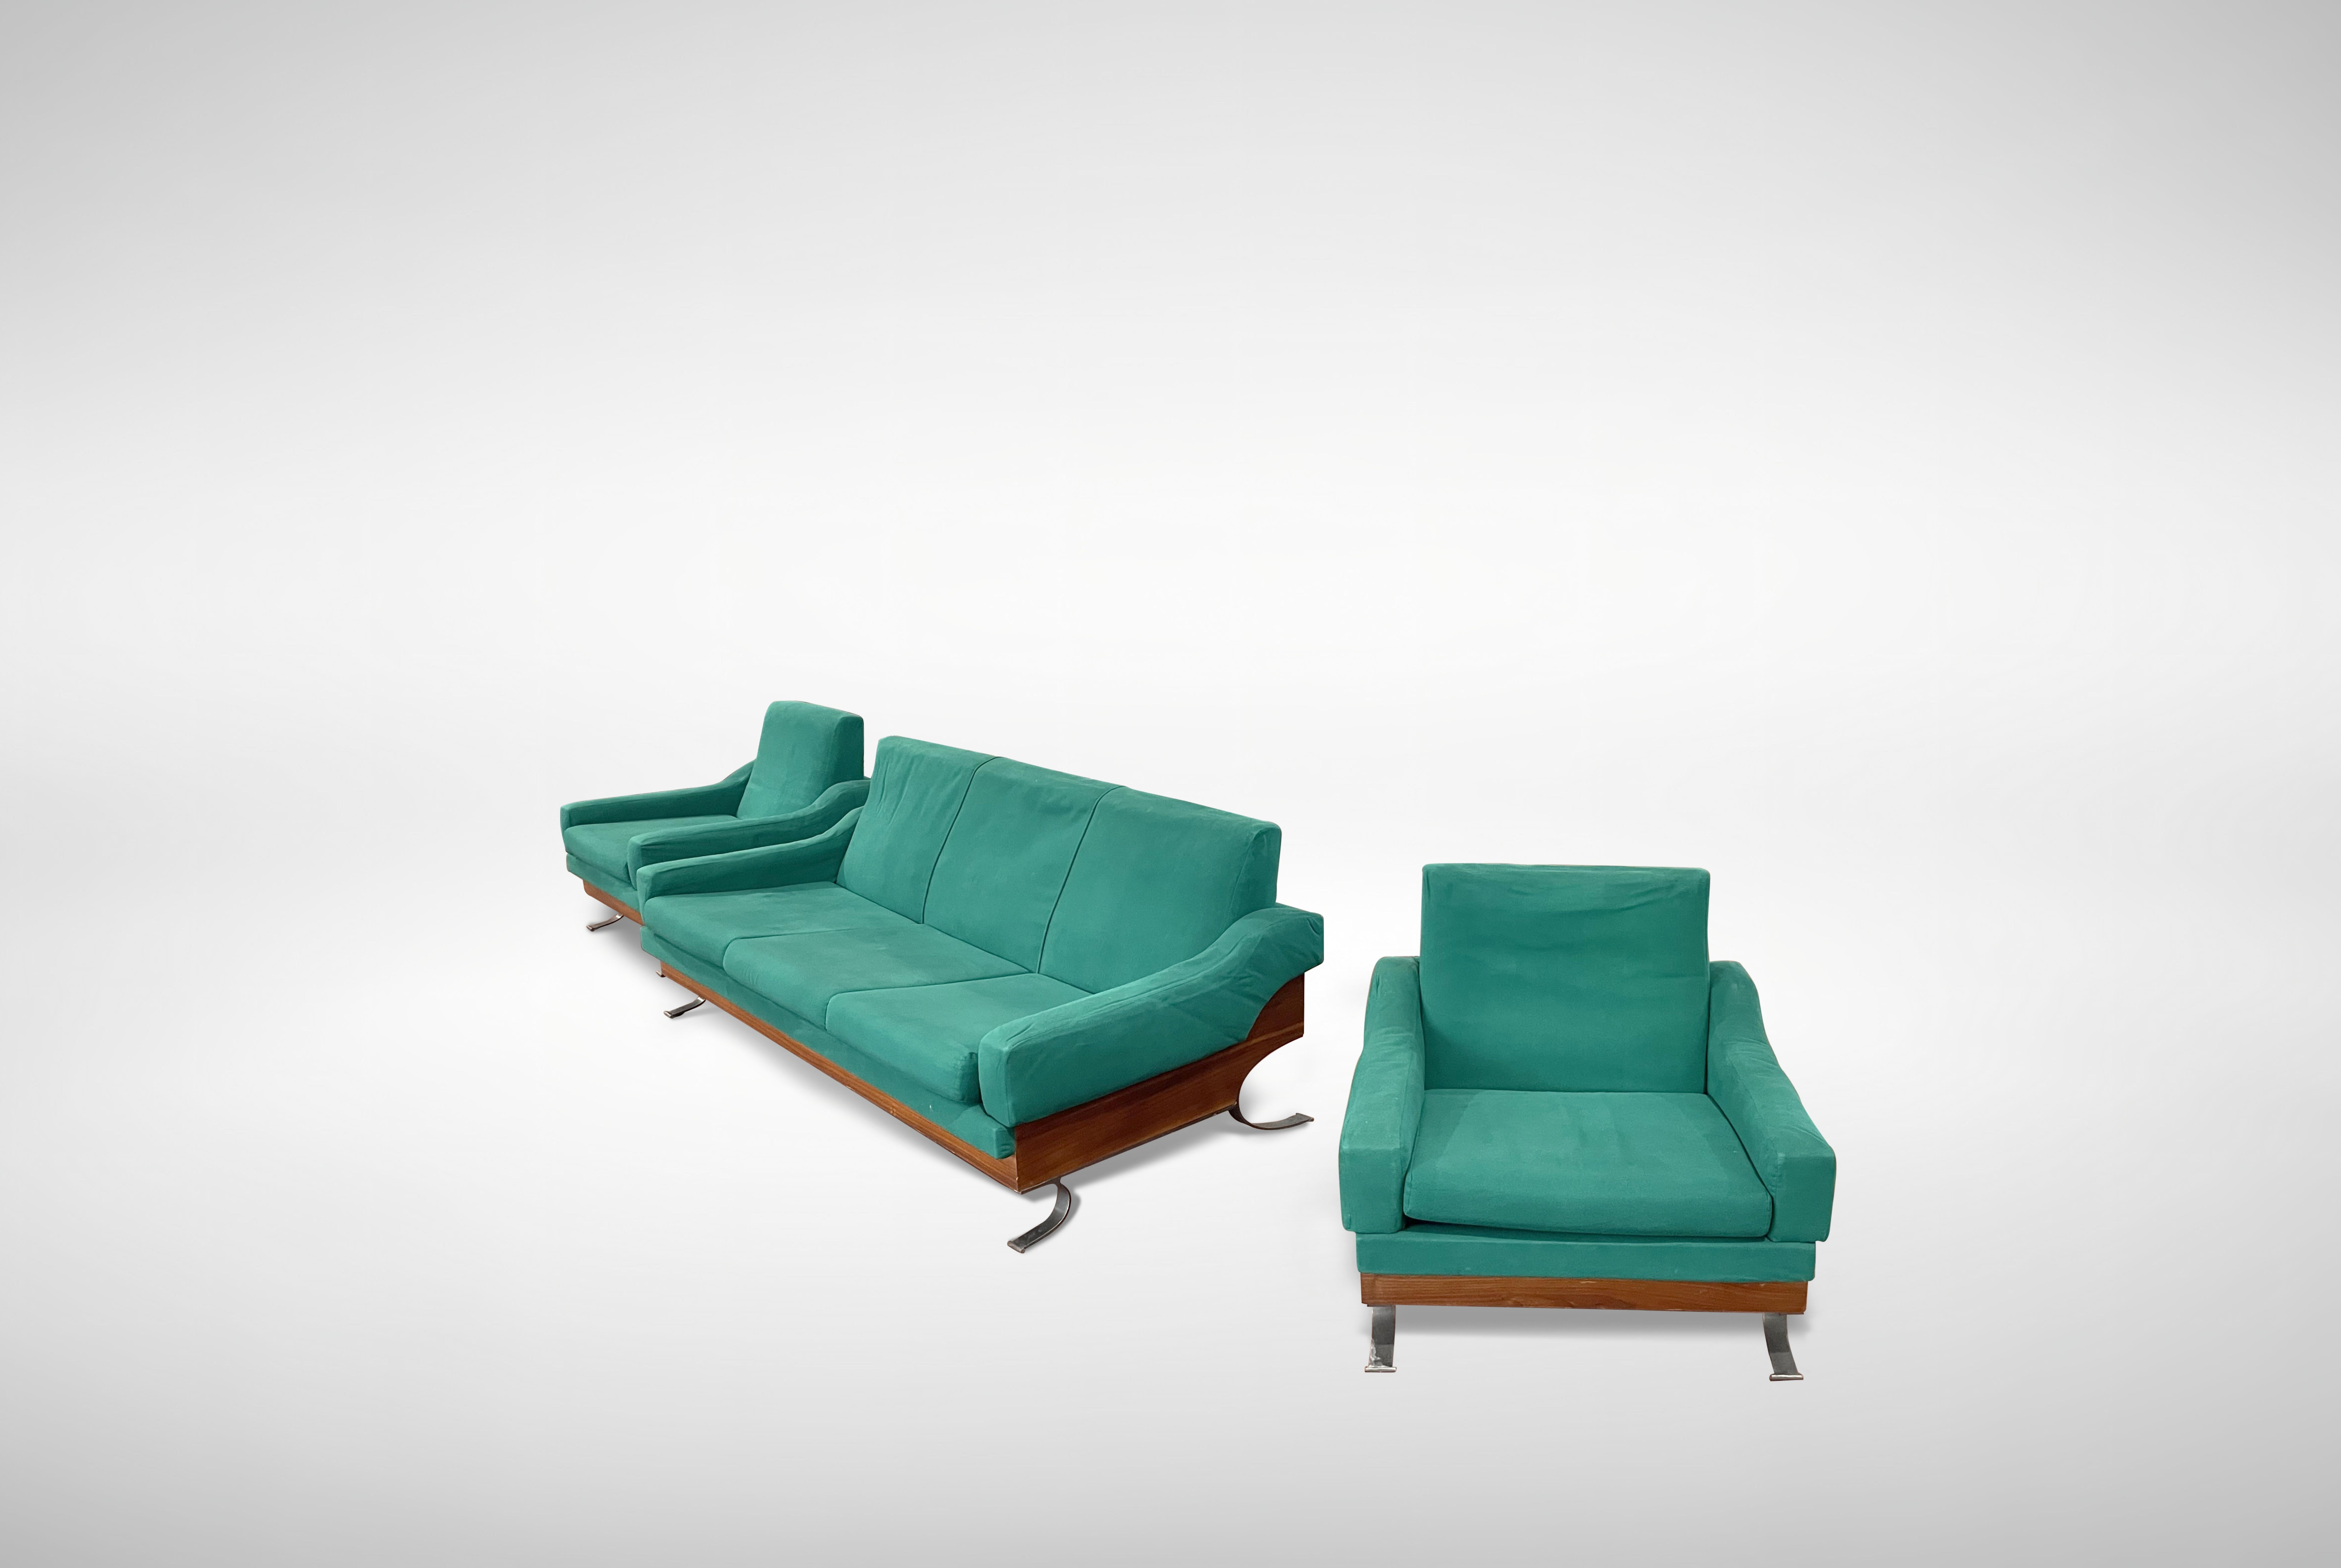 Metal Vintage Sofa Set by Saporiti, Italy 1950s For Sale